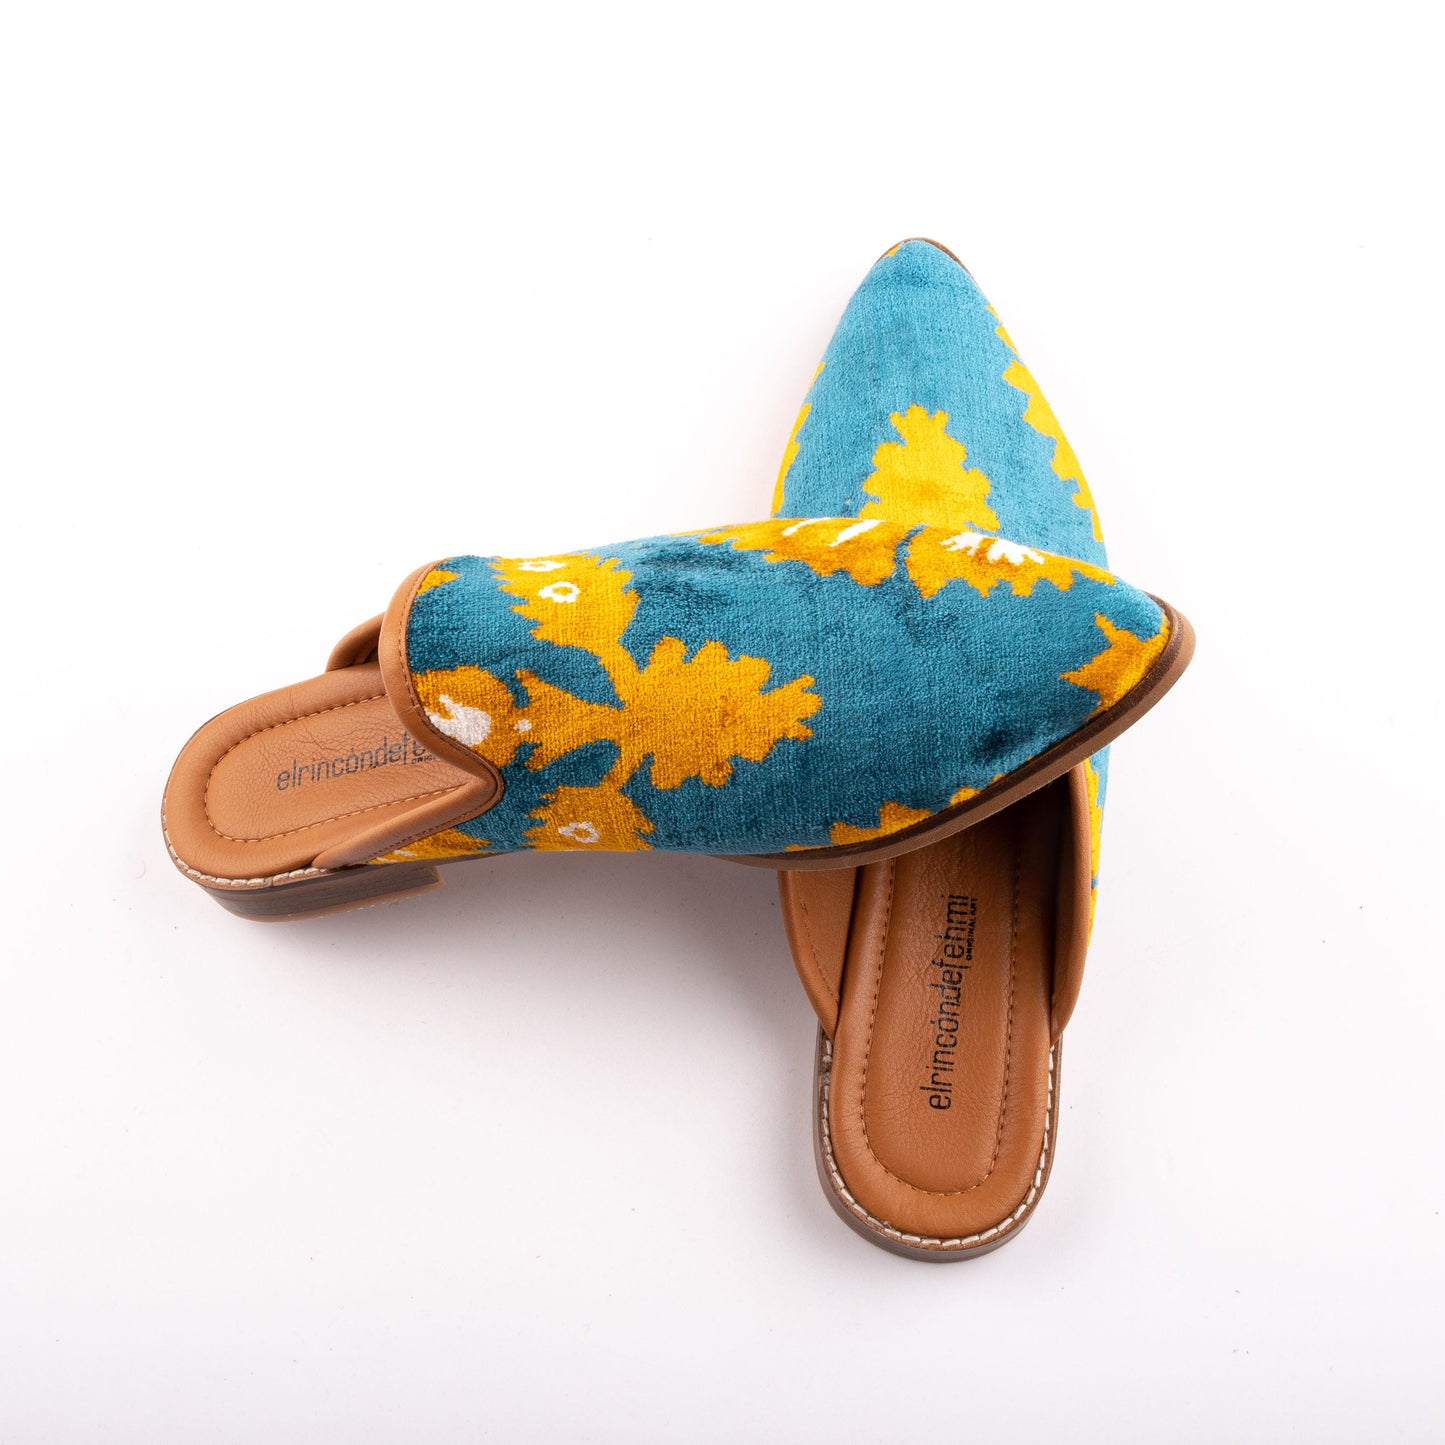 Ethnic Woman Pointed Toe Slipper Crafted From Handmade Velvet and Real Leather Size 11.5  Base Width: 9 cm - Base Length: 29 cm - Heel:  1.5 cm